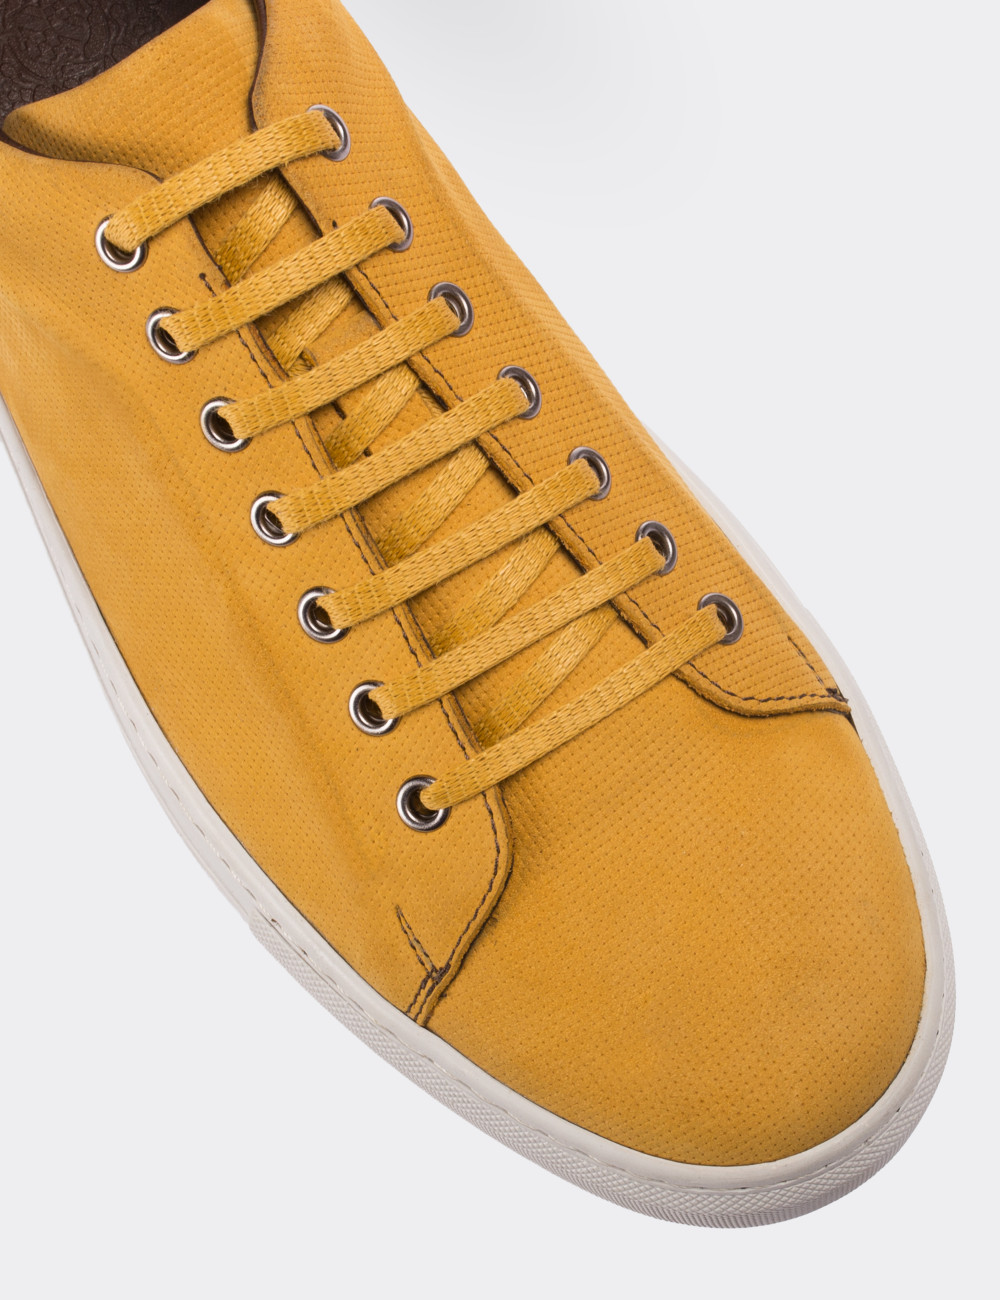 Yellow Nubuck Leather Sneakers - 01669MSRIC01